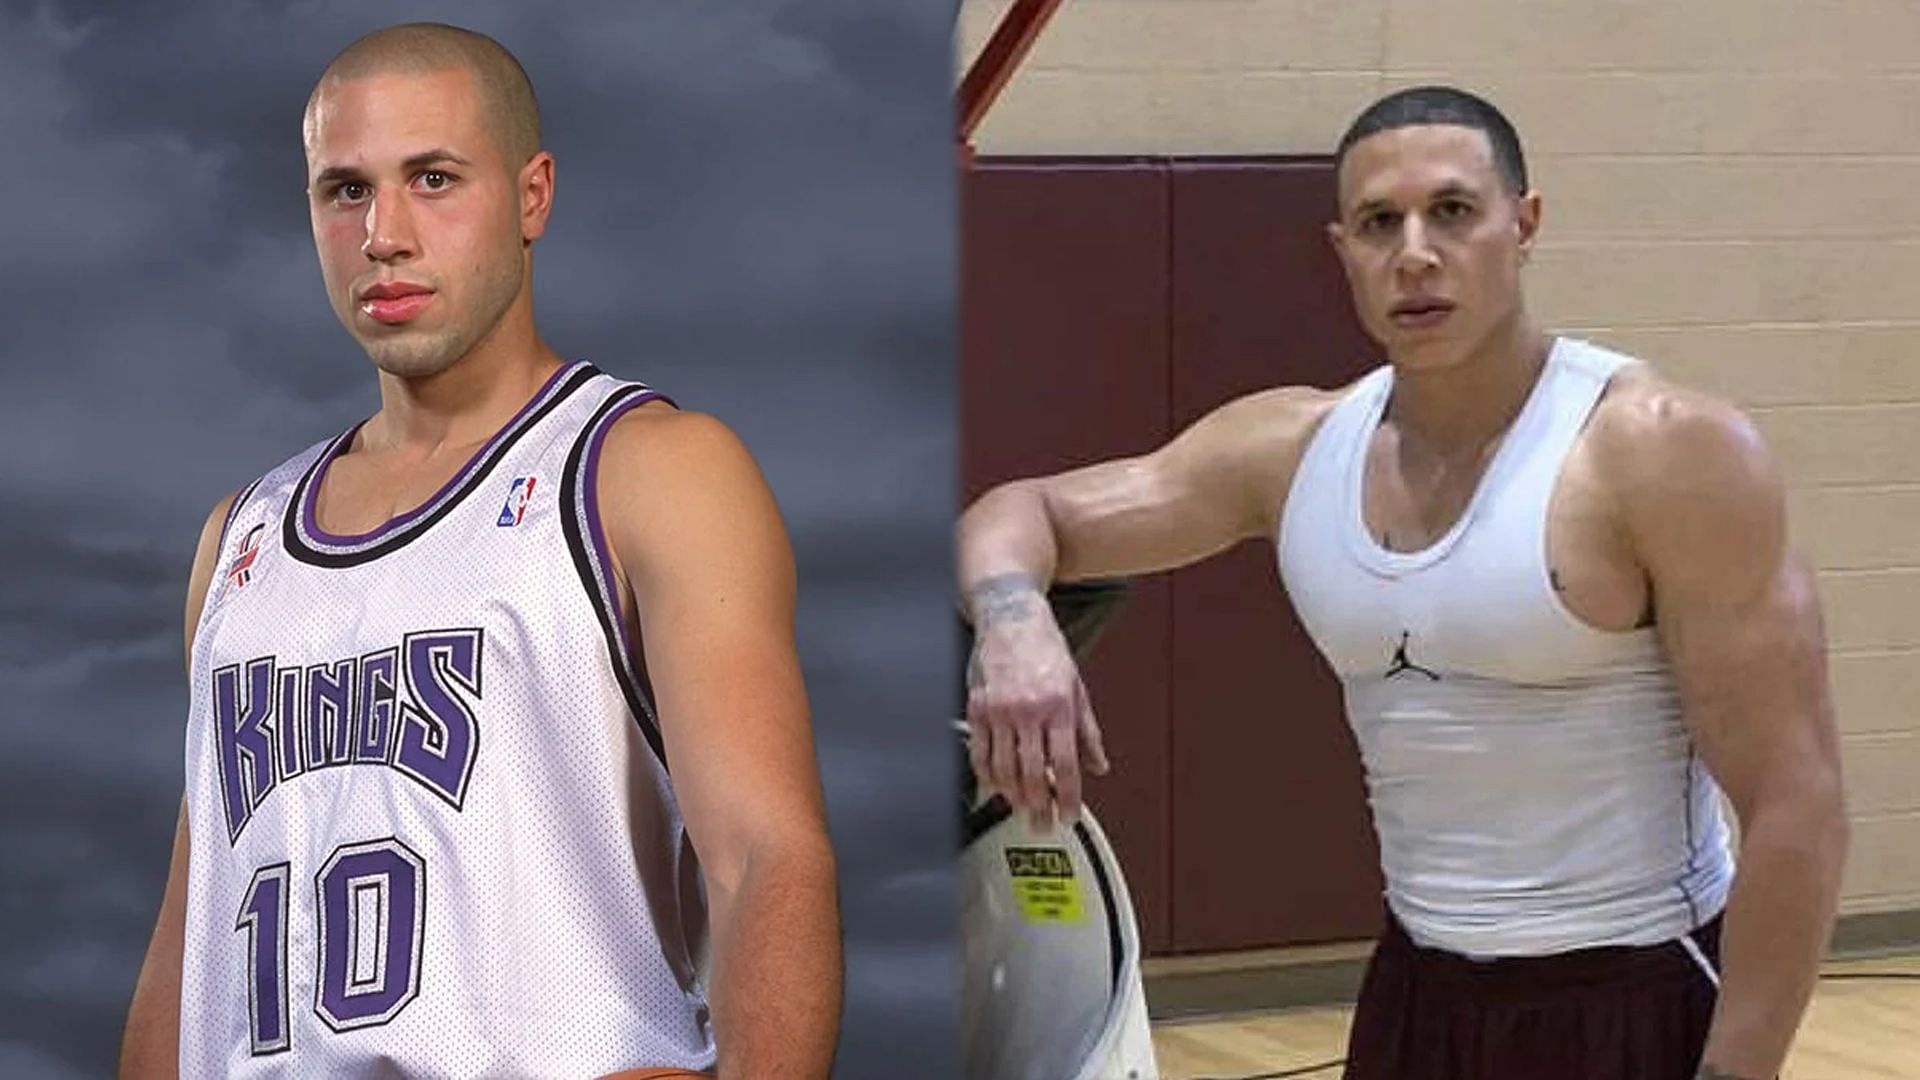 Bibby has completely changed since retiring from the NBA